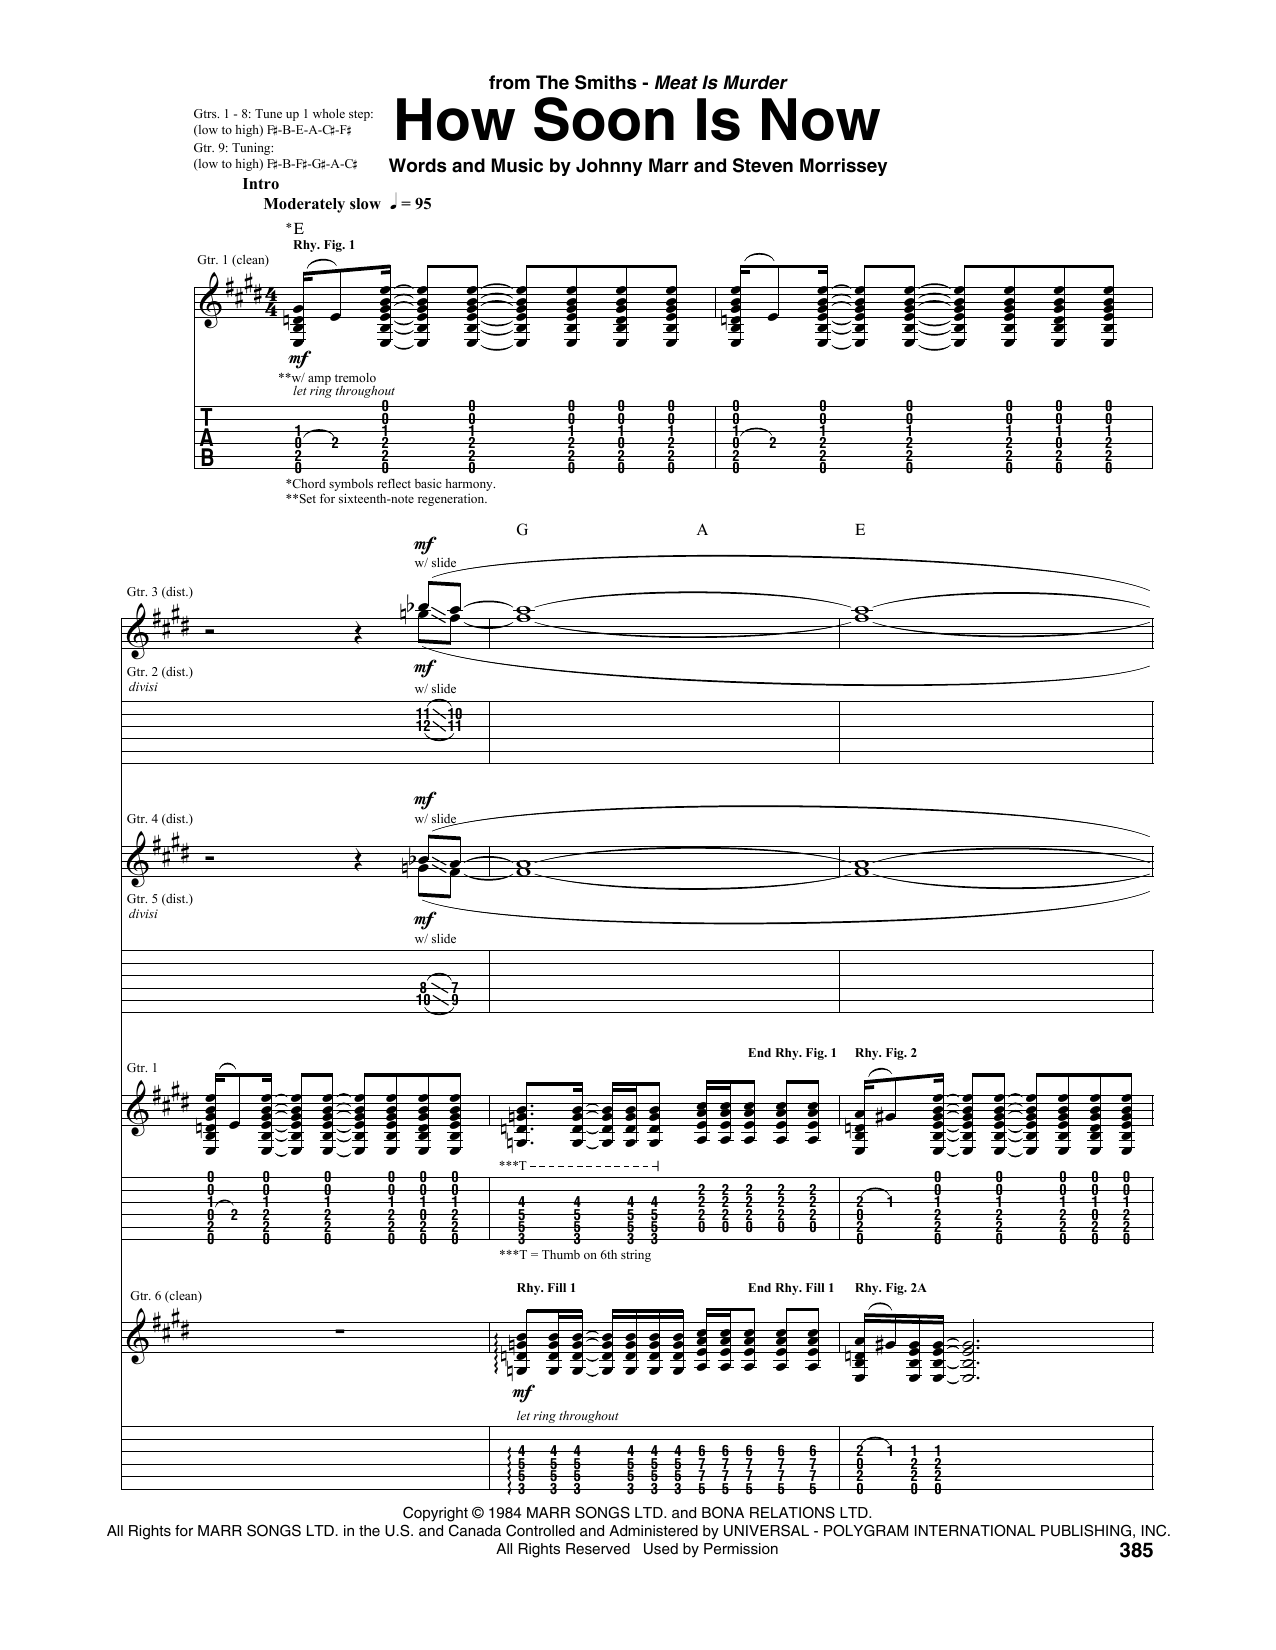 Download The Smiths How Soon Is Now Sheet Music